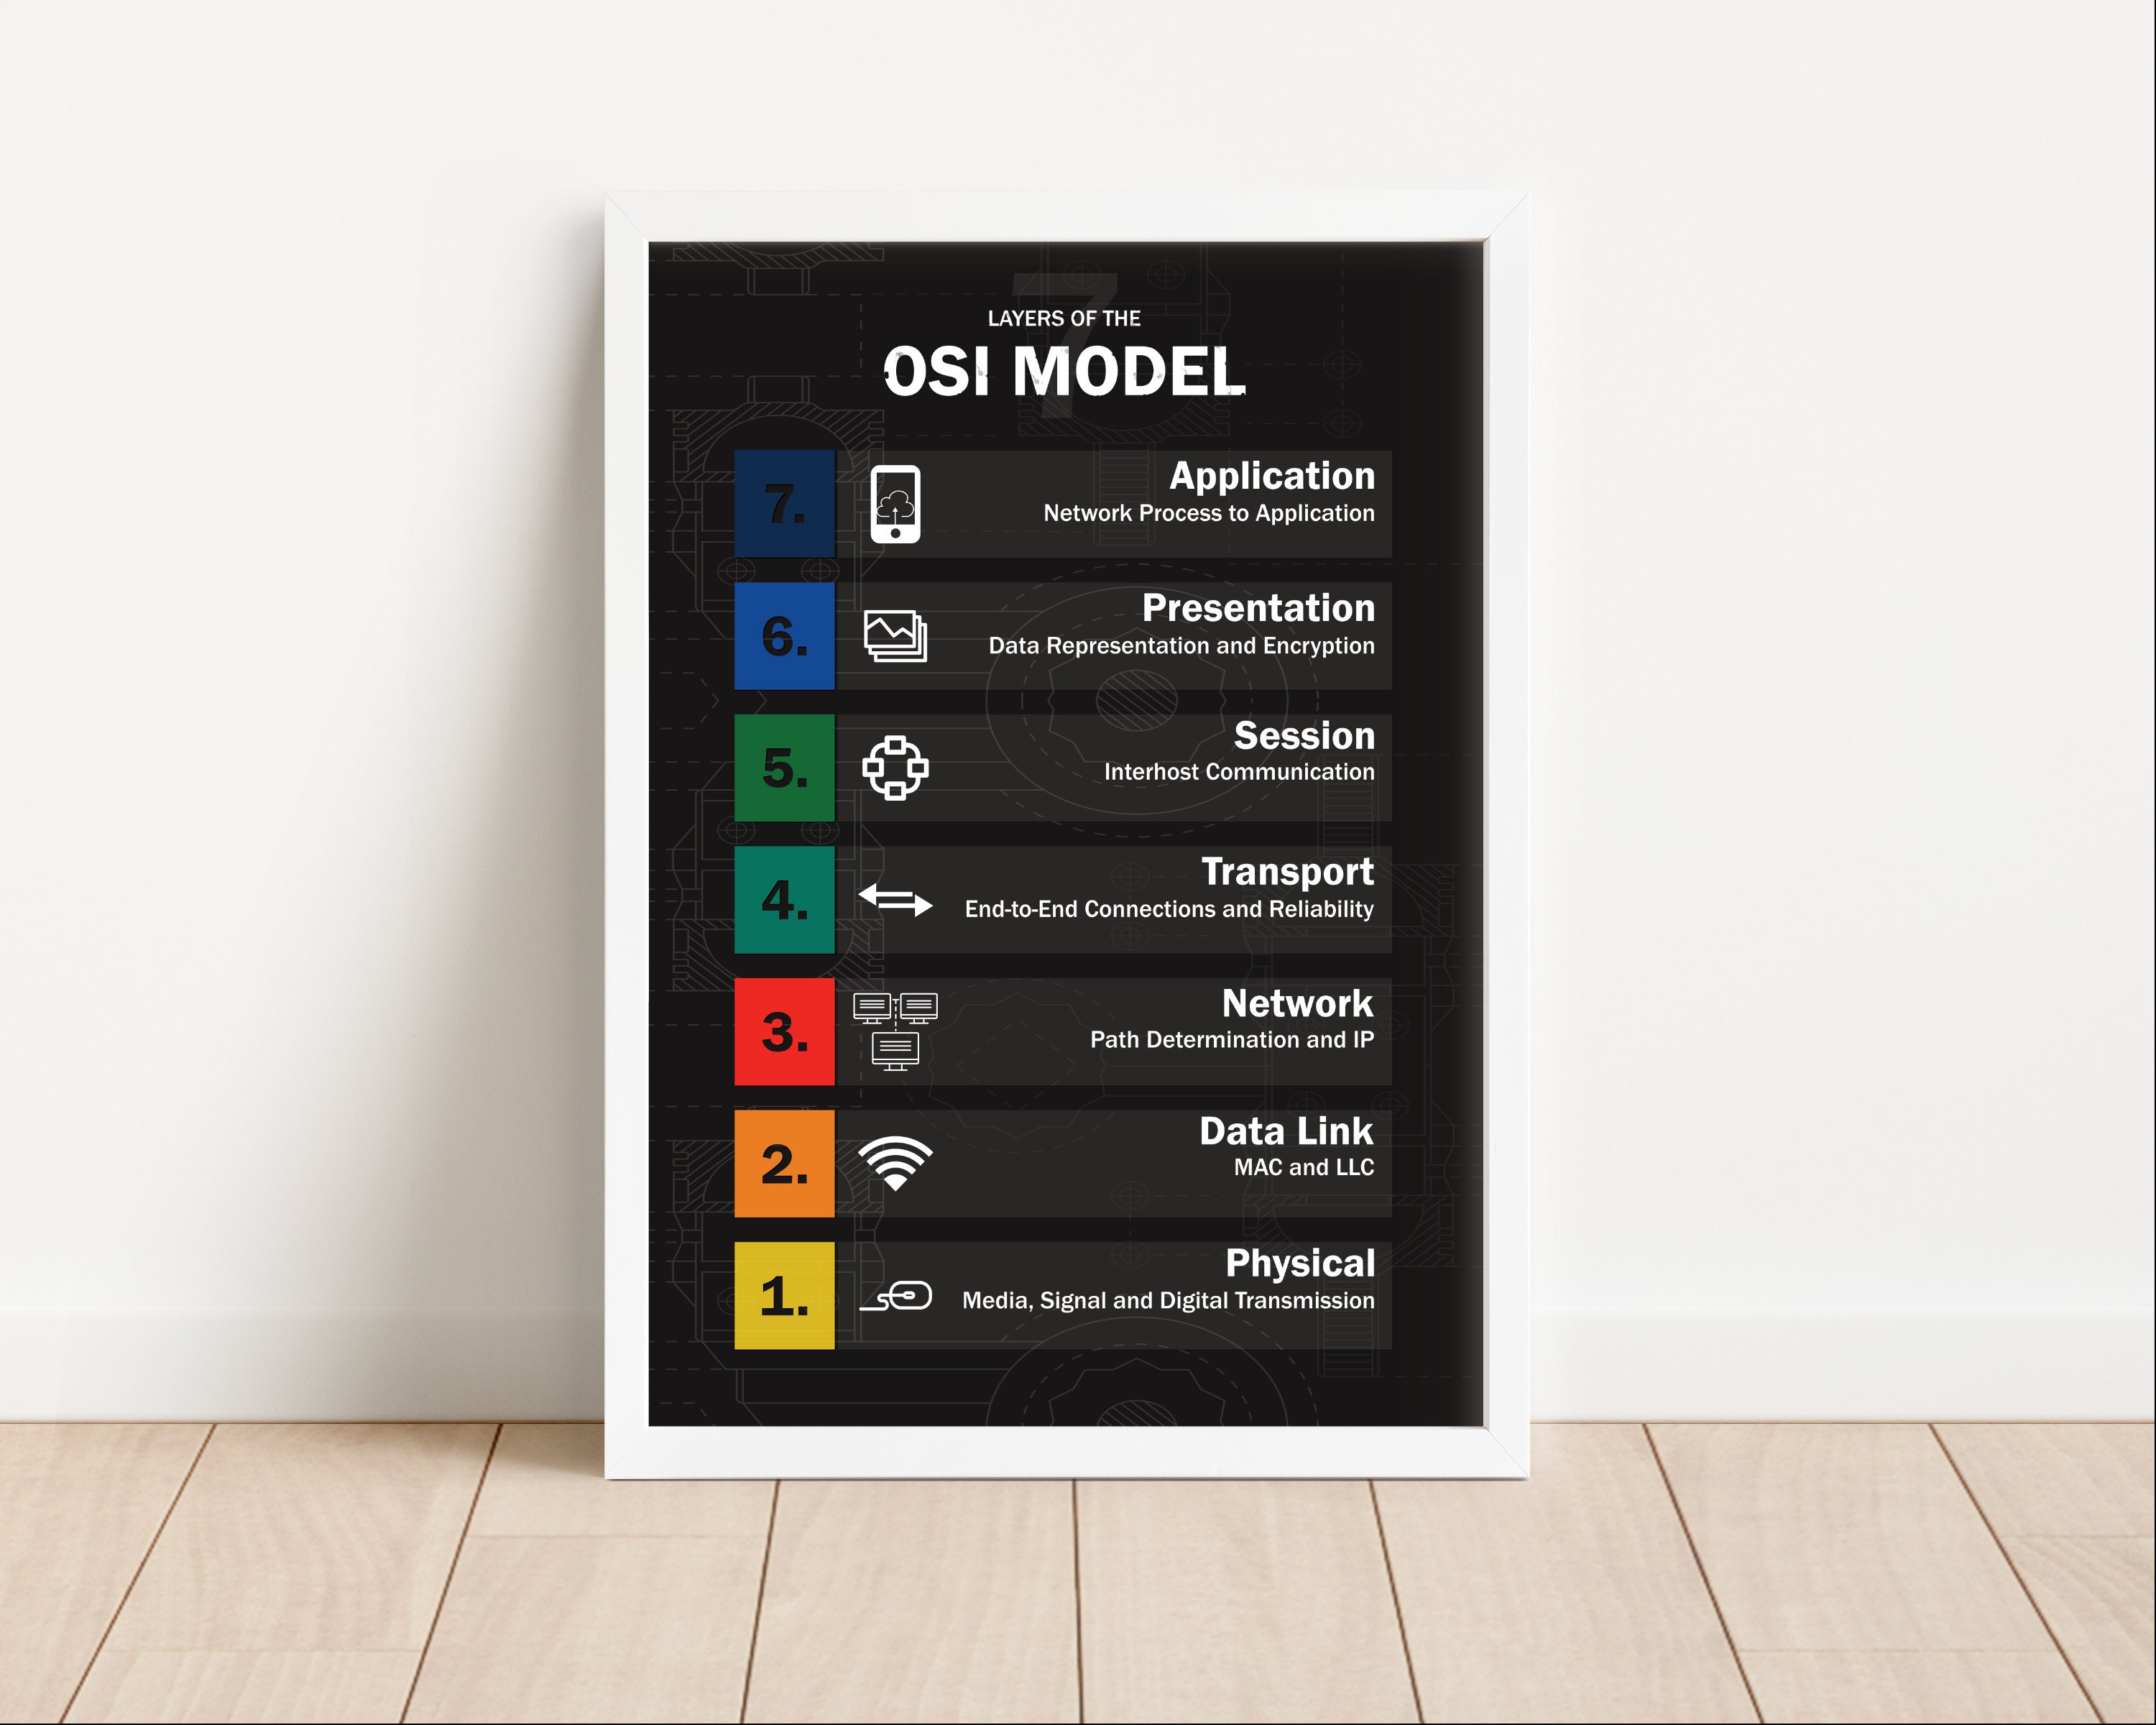 OSI Model Layer 8: The Carbon Layer